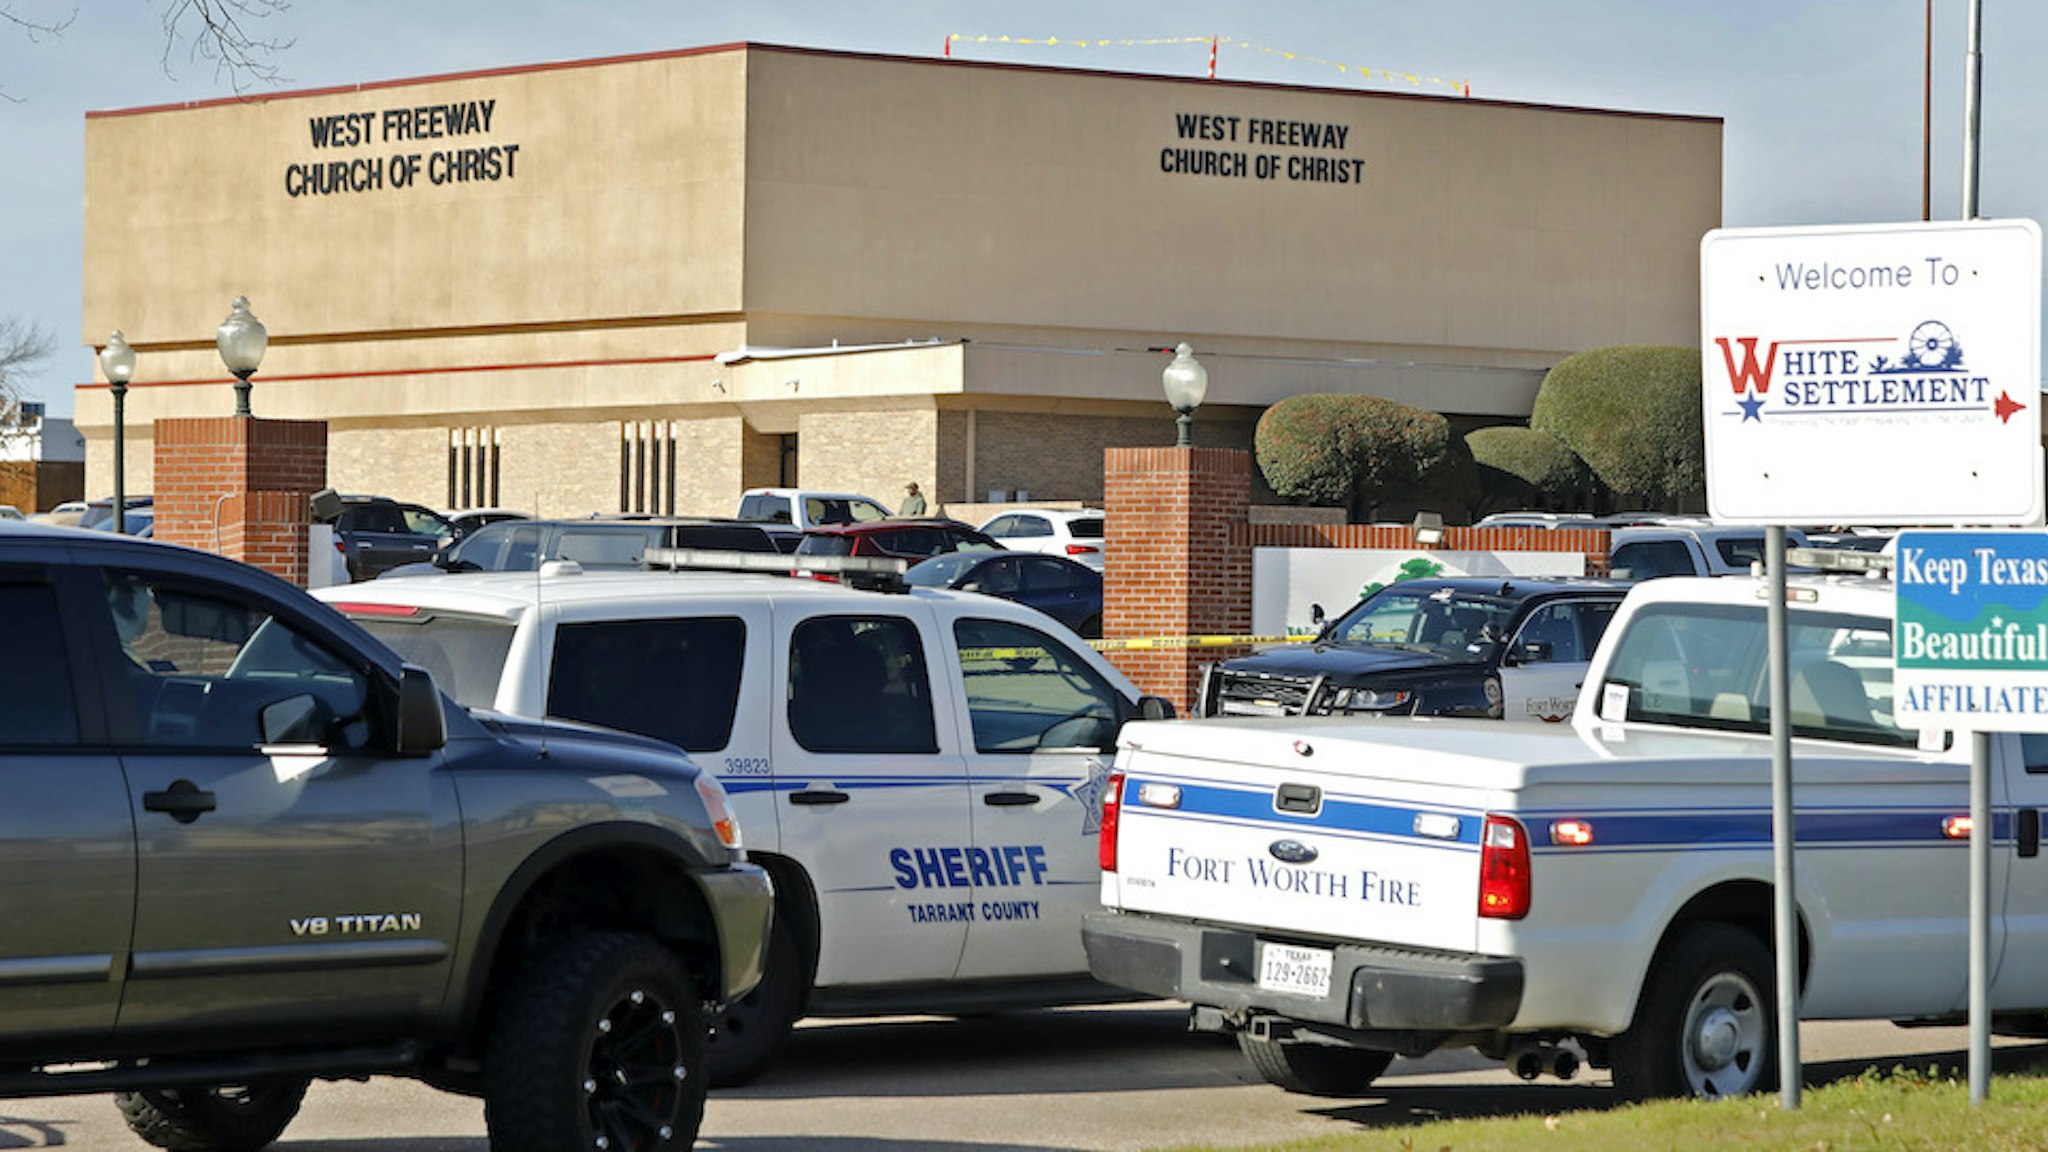 West Freeway Church of Christ where a shooting took place at the morning service on December 29, 2019 in White Settlement, Texas. The shooter was killed by armed members of the church after opening fire during Sunday services and shooting two other people. (Photo by Stewart F. House/Getty Images)